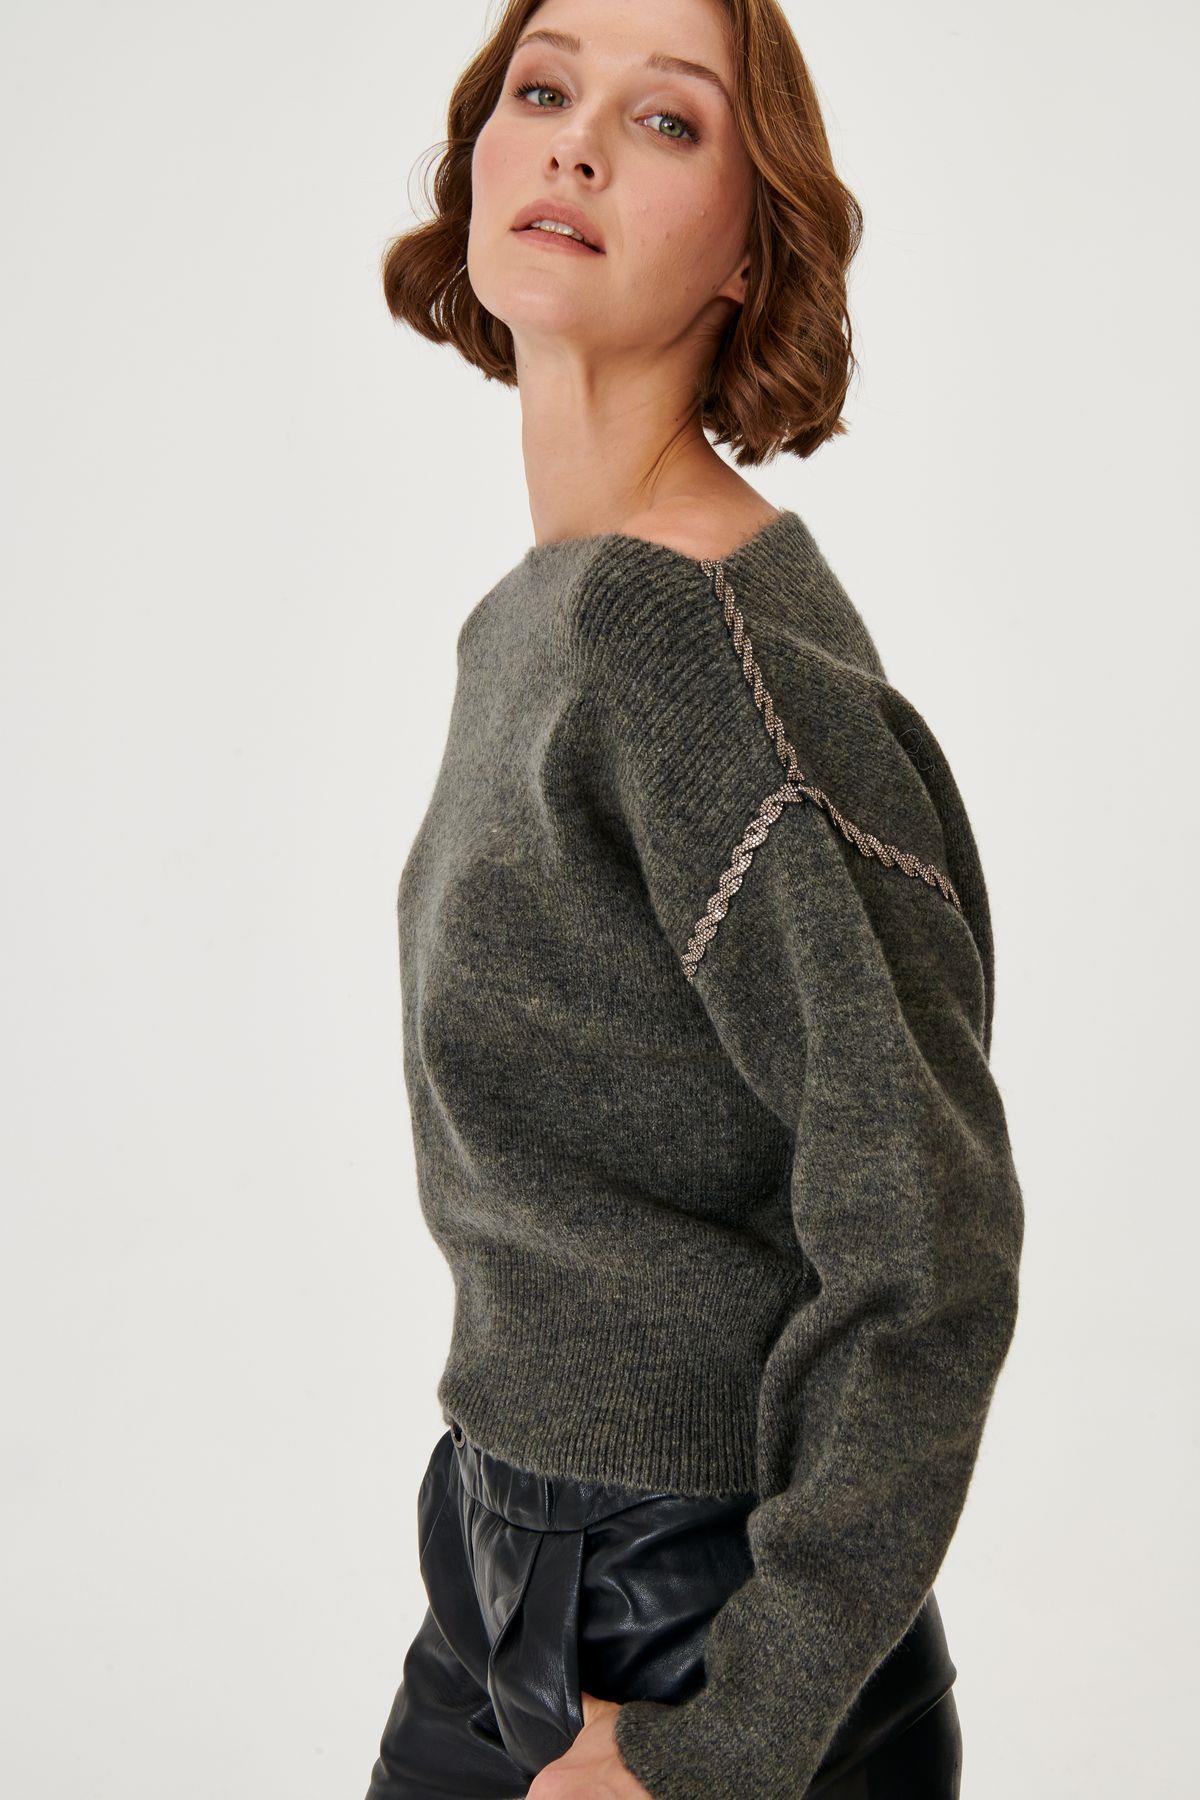 Grey Knitwear Sweater with Handcrafted Spiral Strip Detail